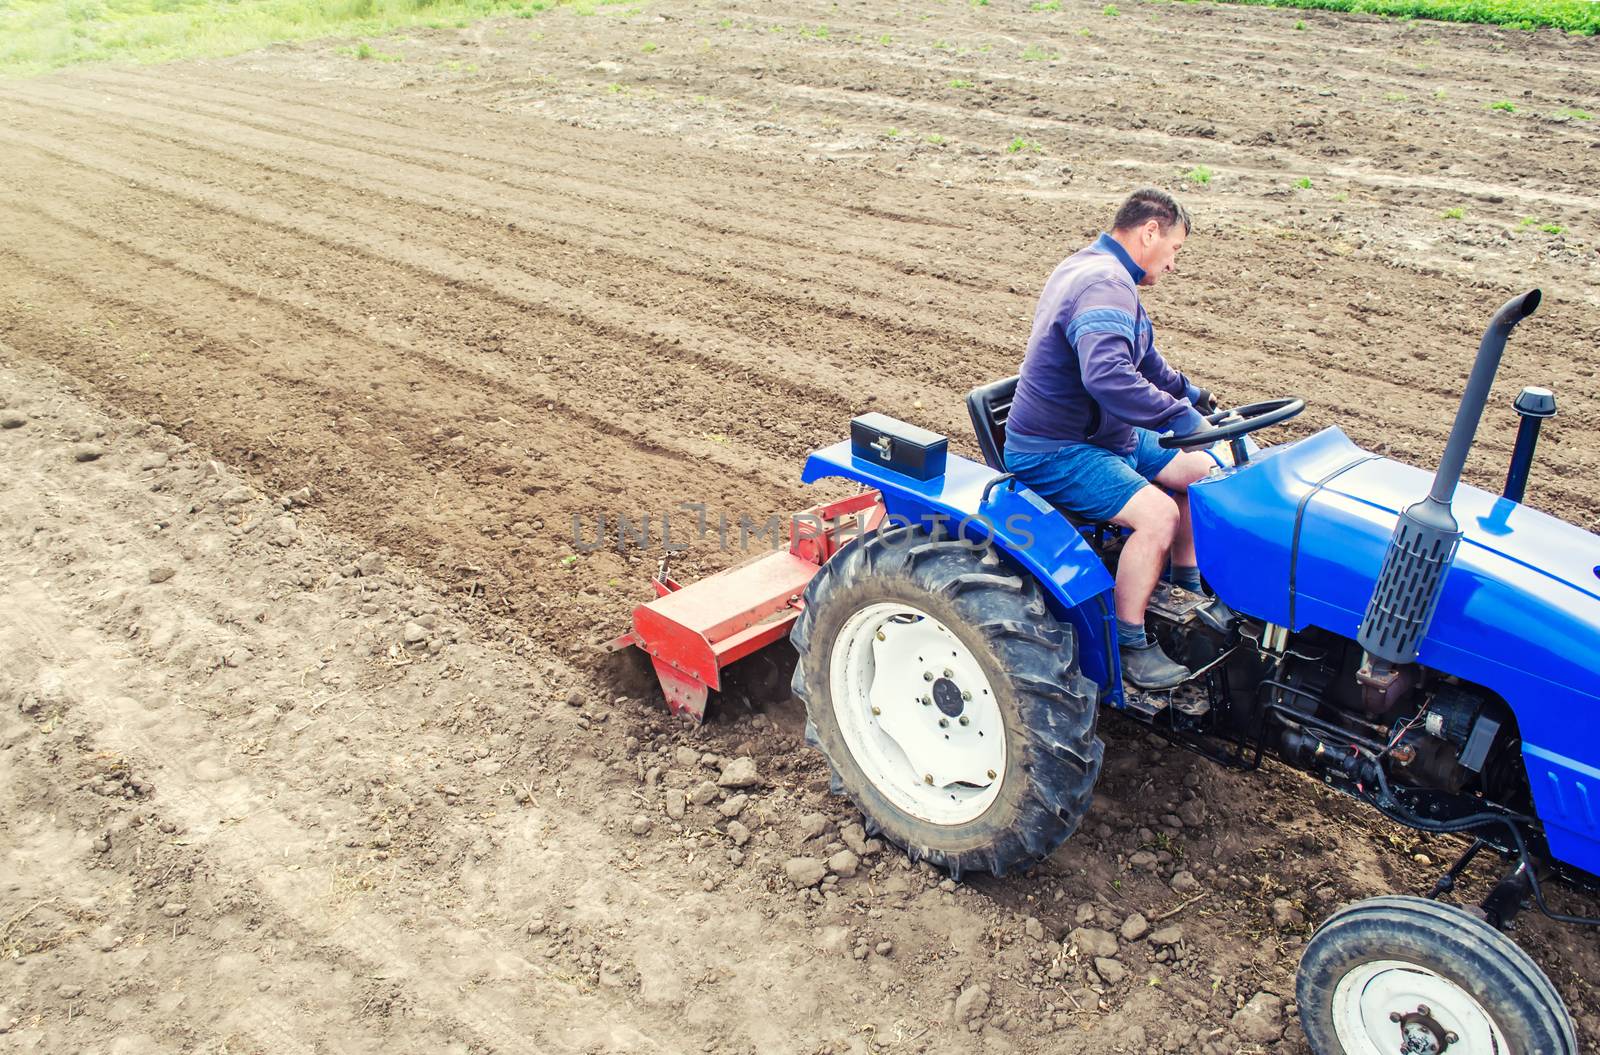 A farmer on a tractor cultivates a farm field. Grinding and loosening soil, removing plants and roots from past harvest. Field preparation for new crop planting. Cultivation equipment. by iLixe48